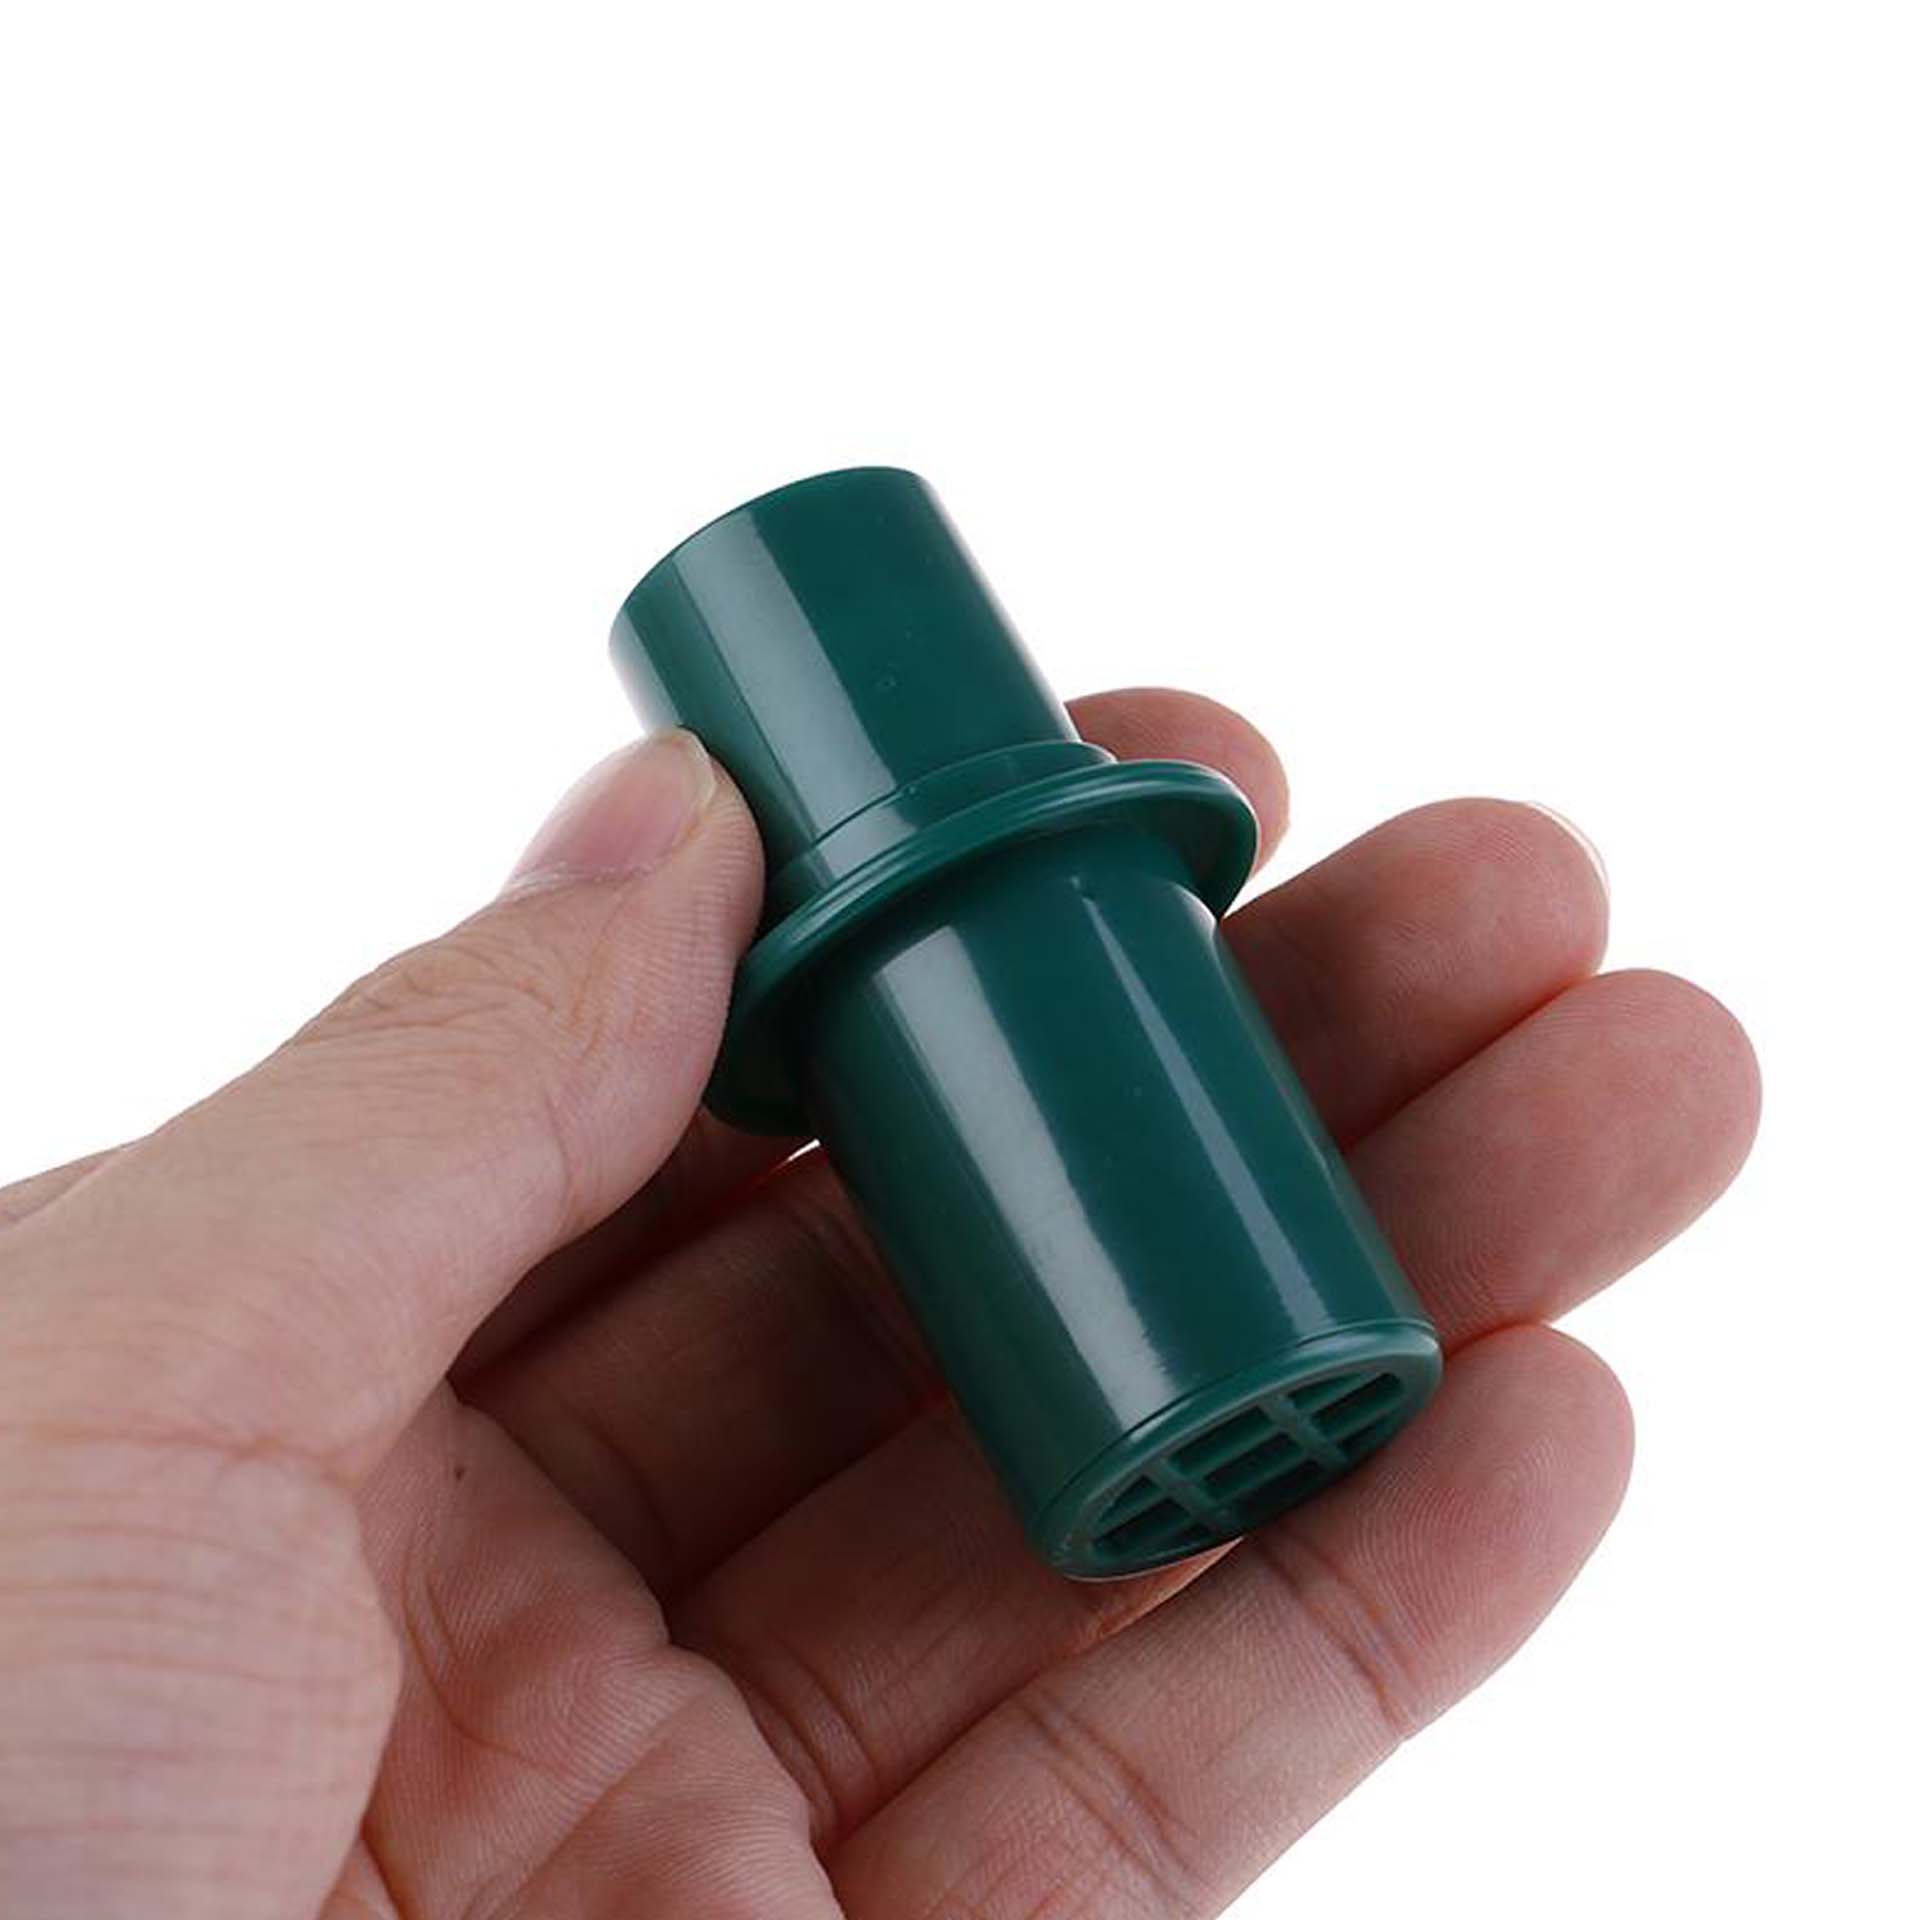 Image of a green CPR practice mask valve being held by a hand